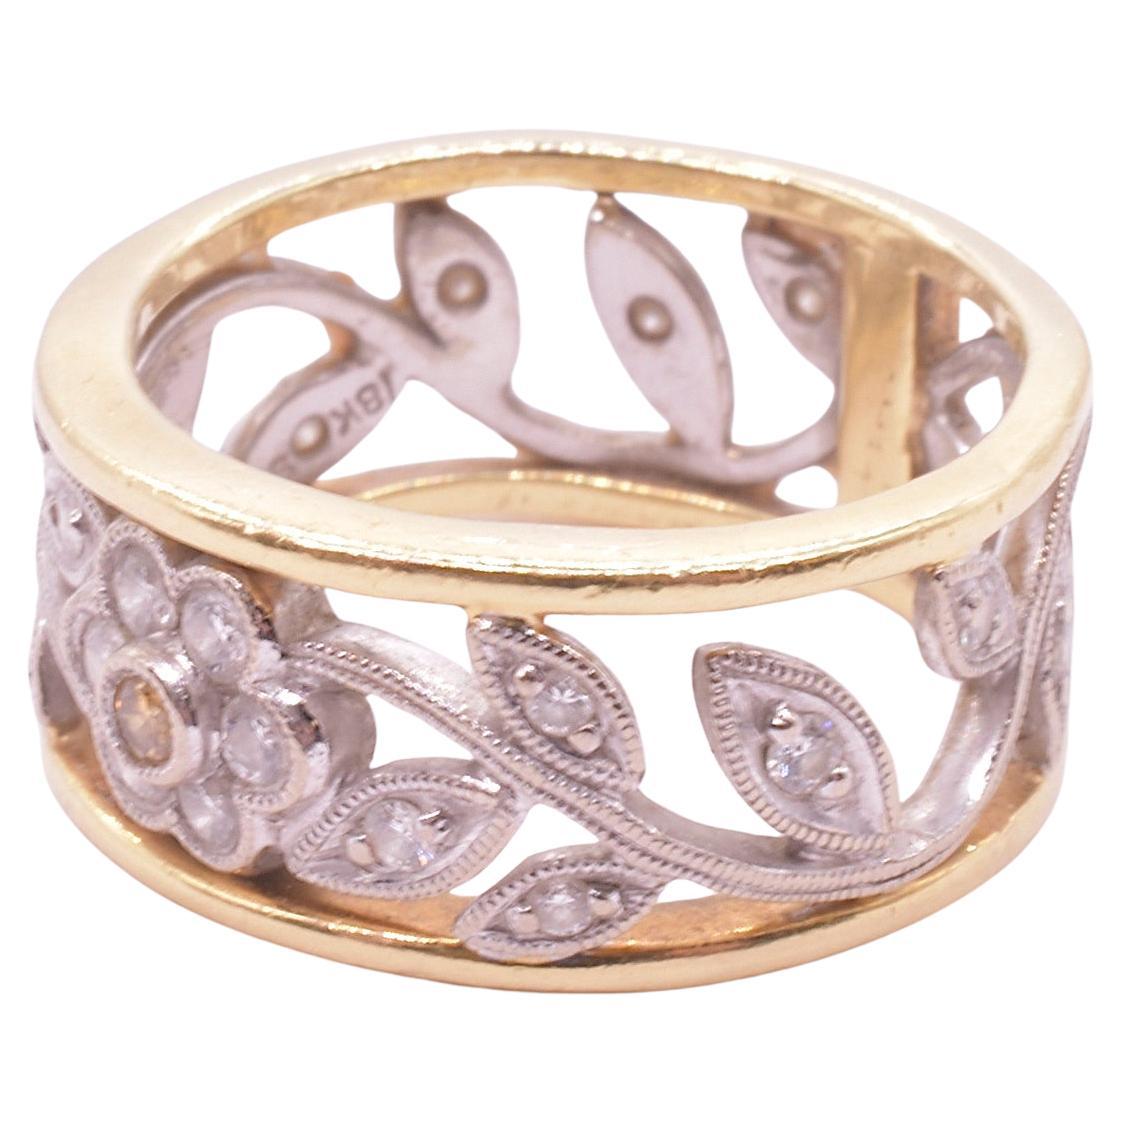 Stylized 18 karat flower band with white and yellow gold accents, our ring has flower stems with carved leaves extending from the vertical gold strip on one side of the band and circling around in each direction to reach the flower 180 degrees